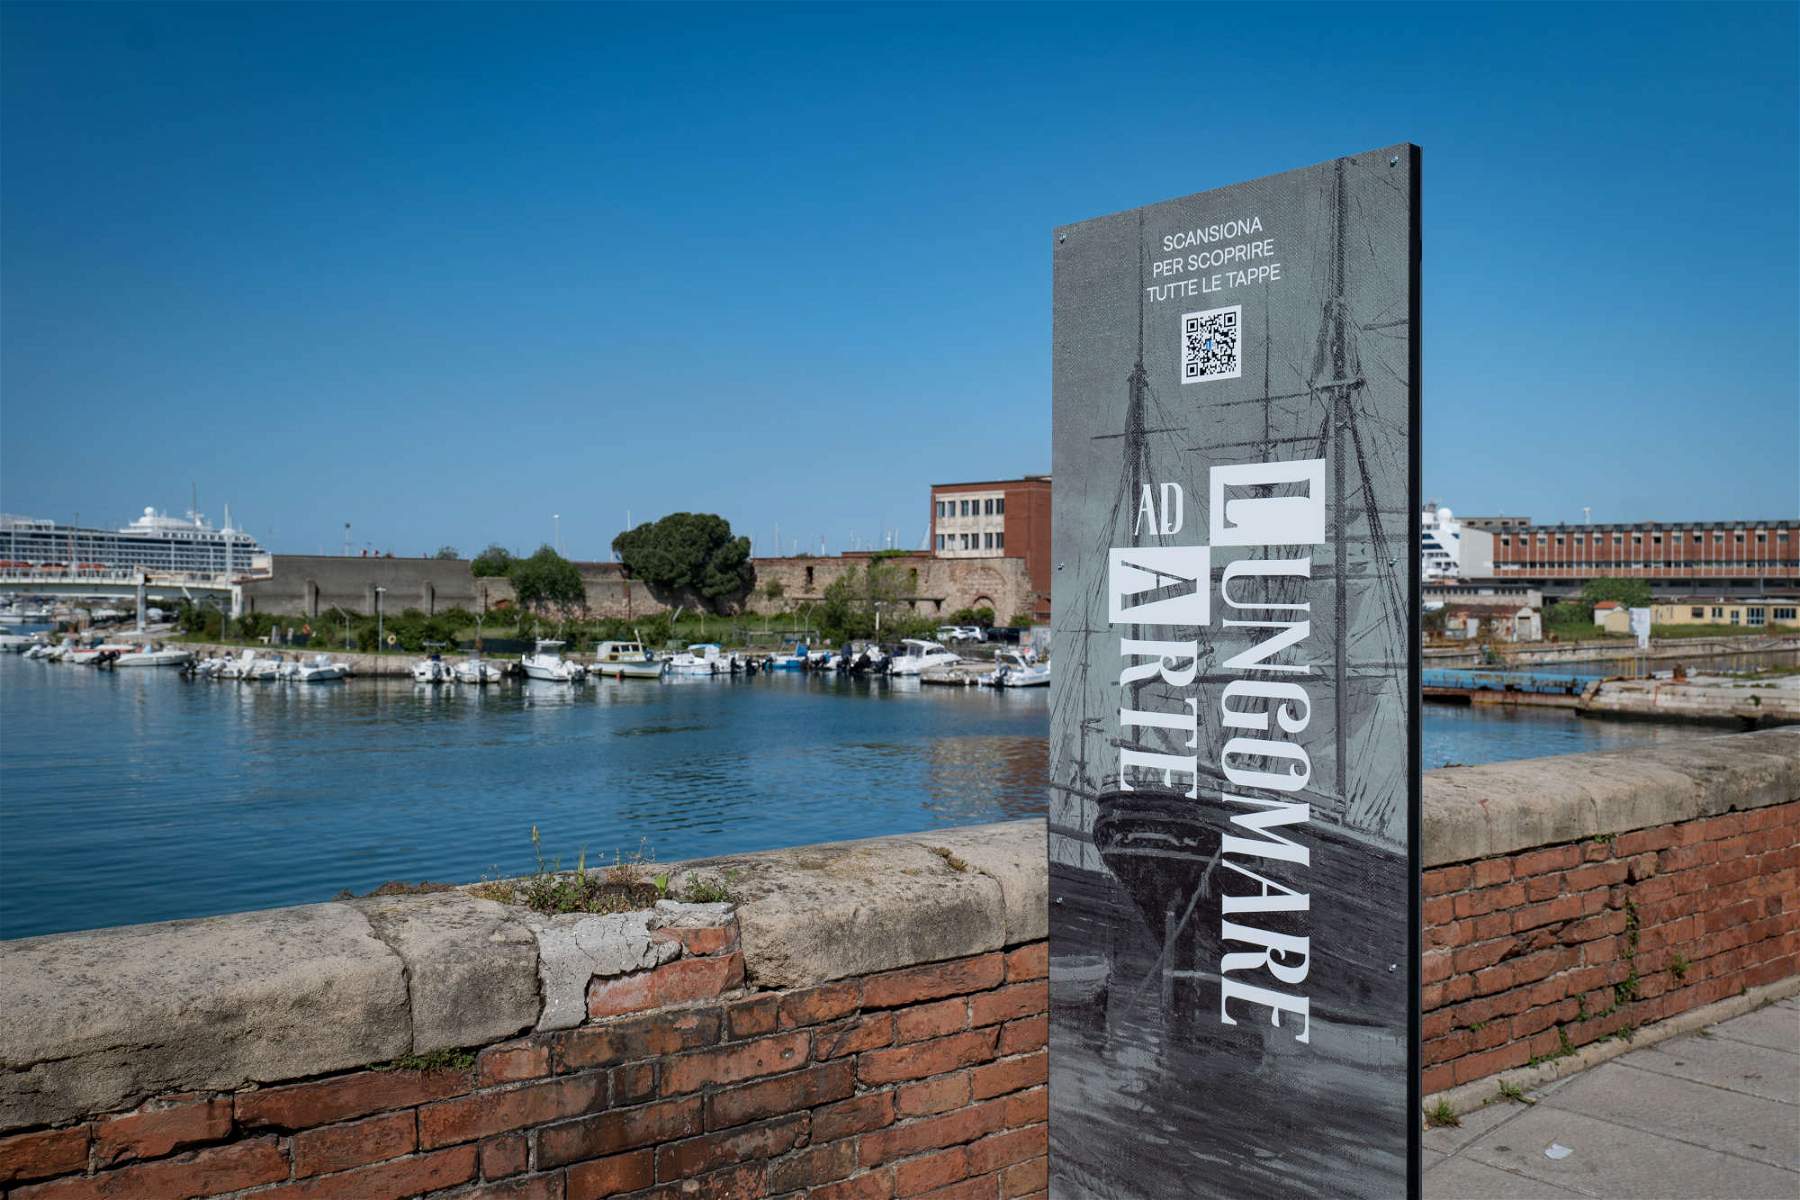 Lungomare ad Arte: a project in Livorno to learn about the places of great artists